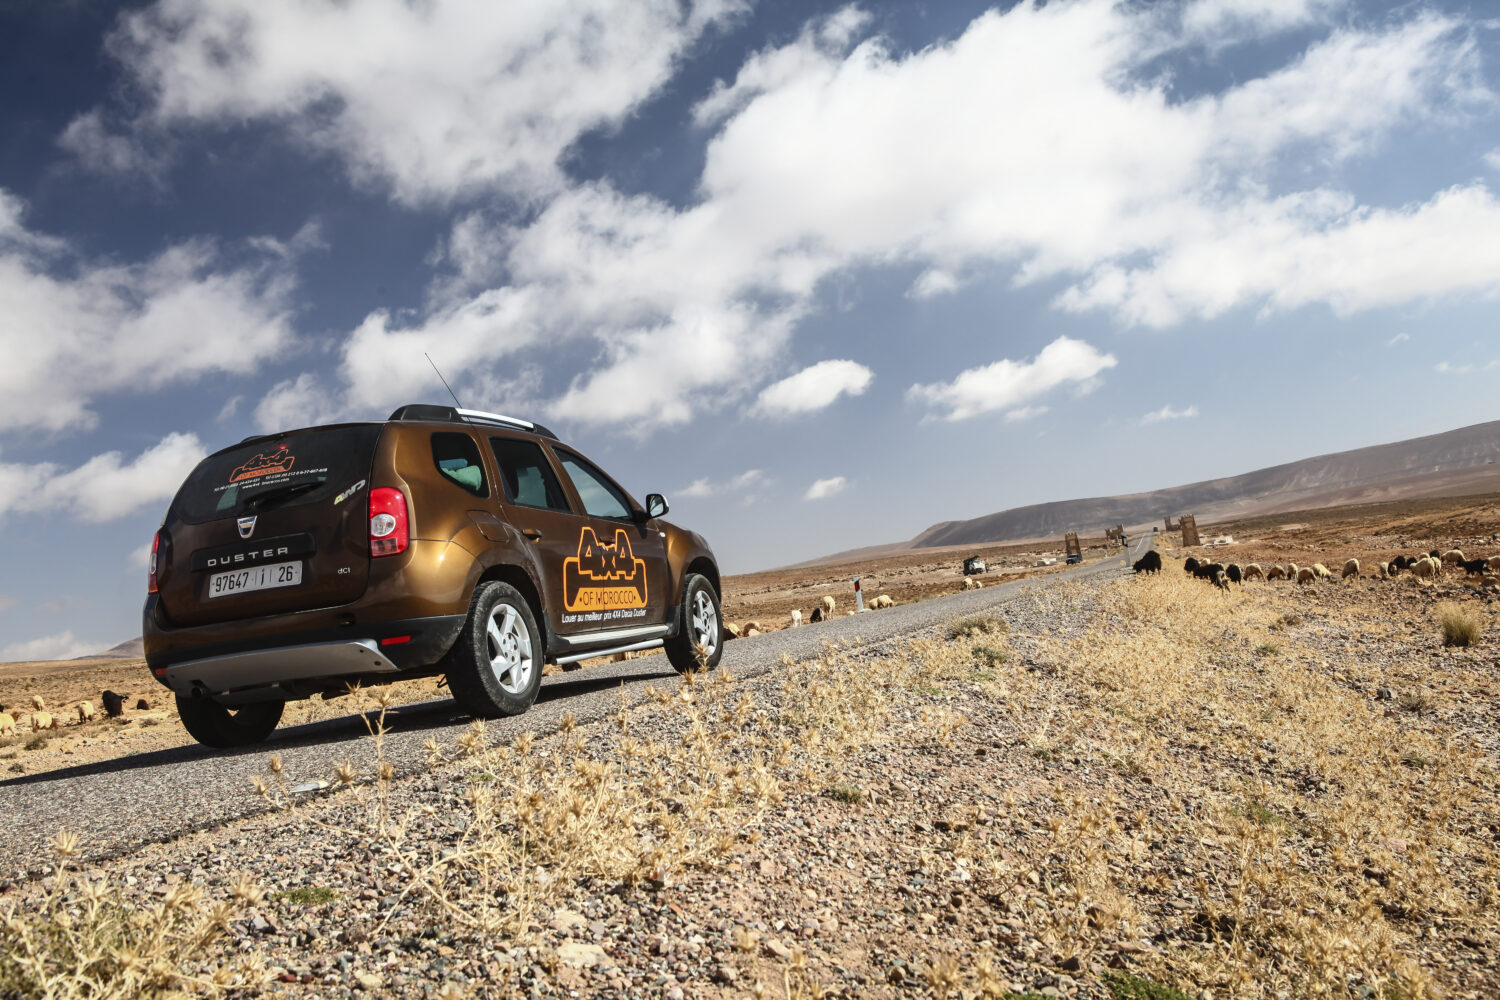 2022 - Story Dacia - 2 million Duster: behind the scenes of a success story